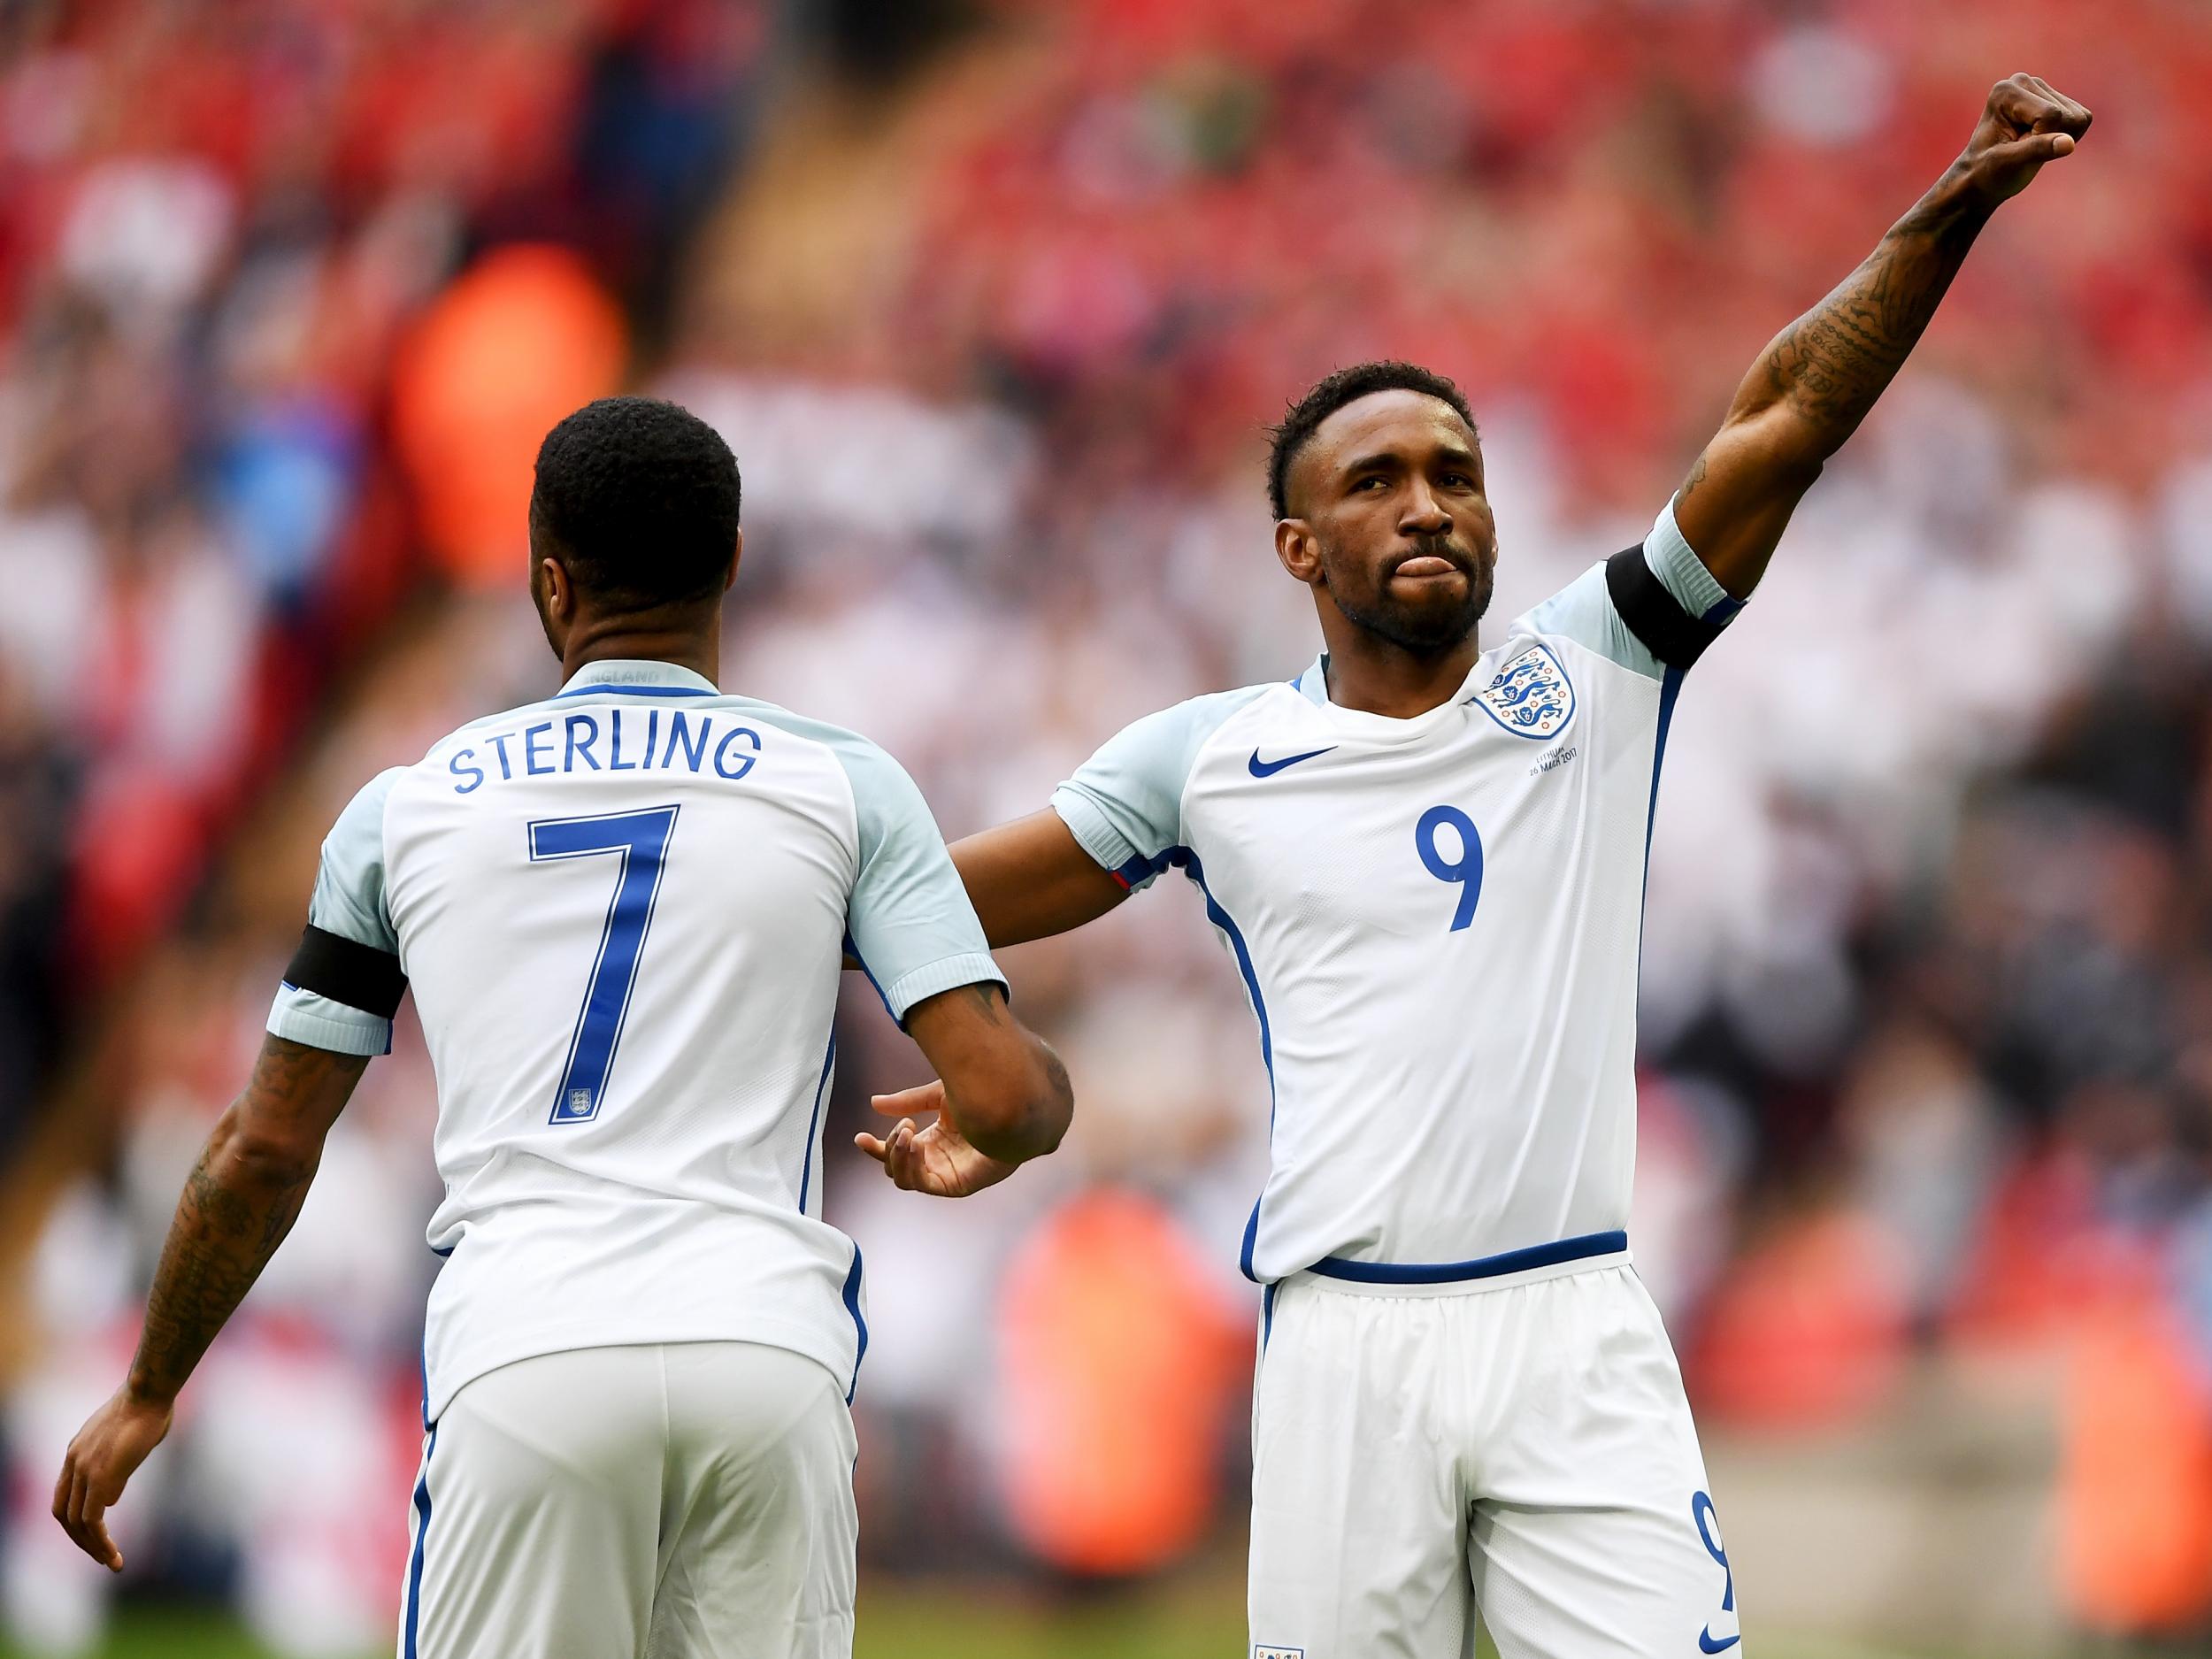 Defoe opened the scoring on his return to the England team